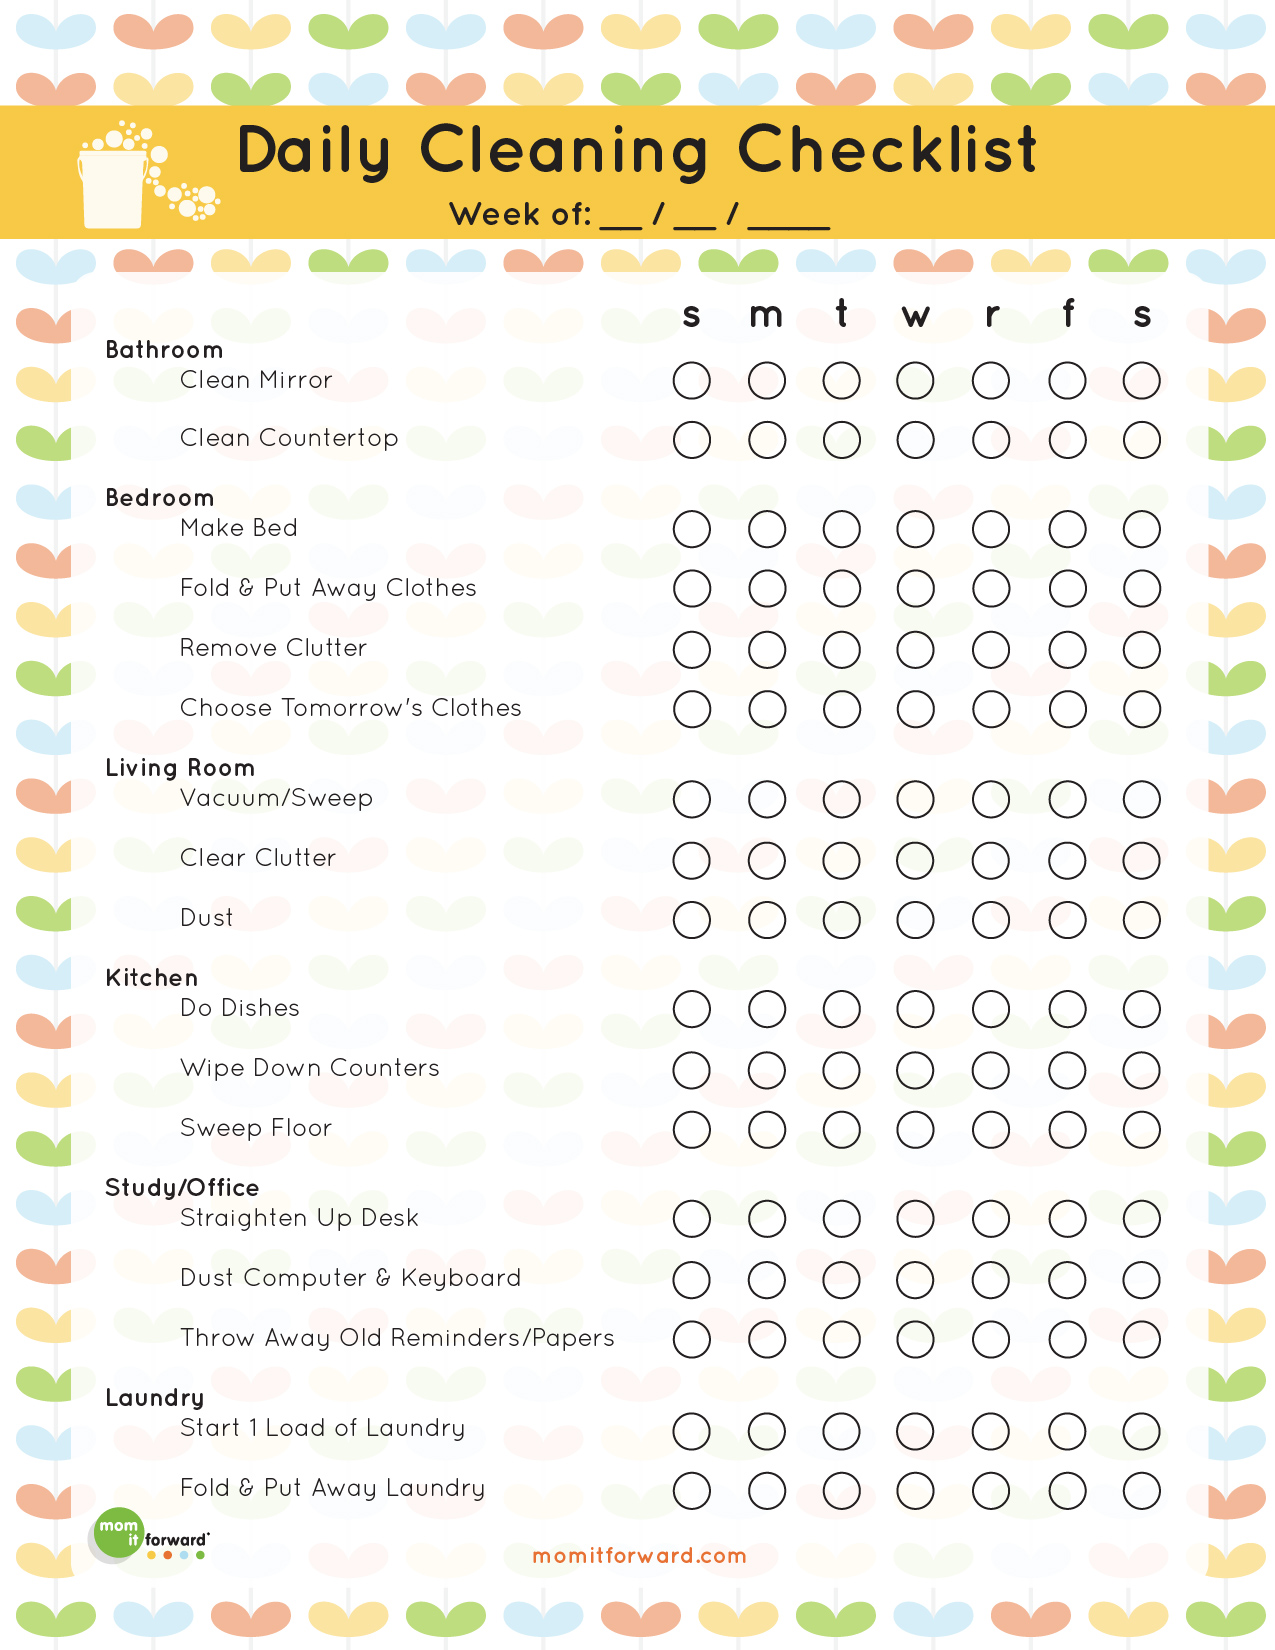 5-best-images-of-daily-house-cleaning-schedule-printable-weekly-house